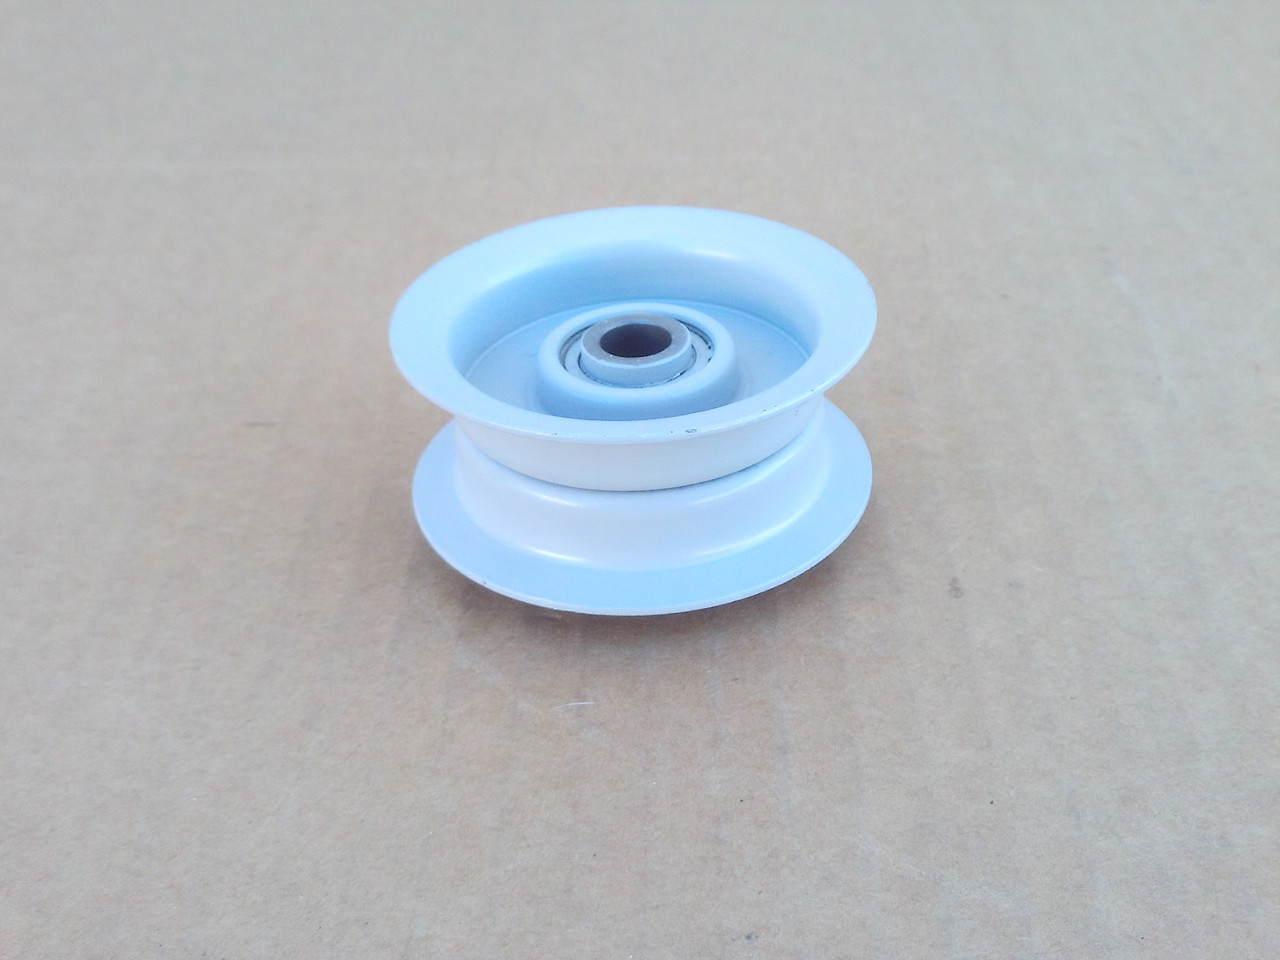 Idler Pulley for Snapper 14340, 7014340, 7014340YP, 1-4340, Height: 1", ID: 3/8", OD: 2-1/2"